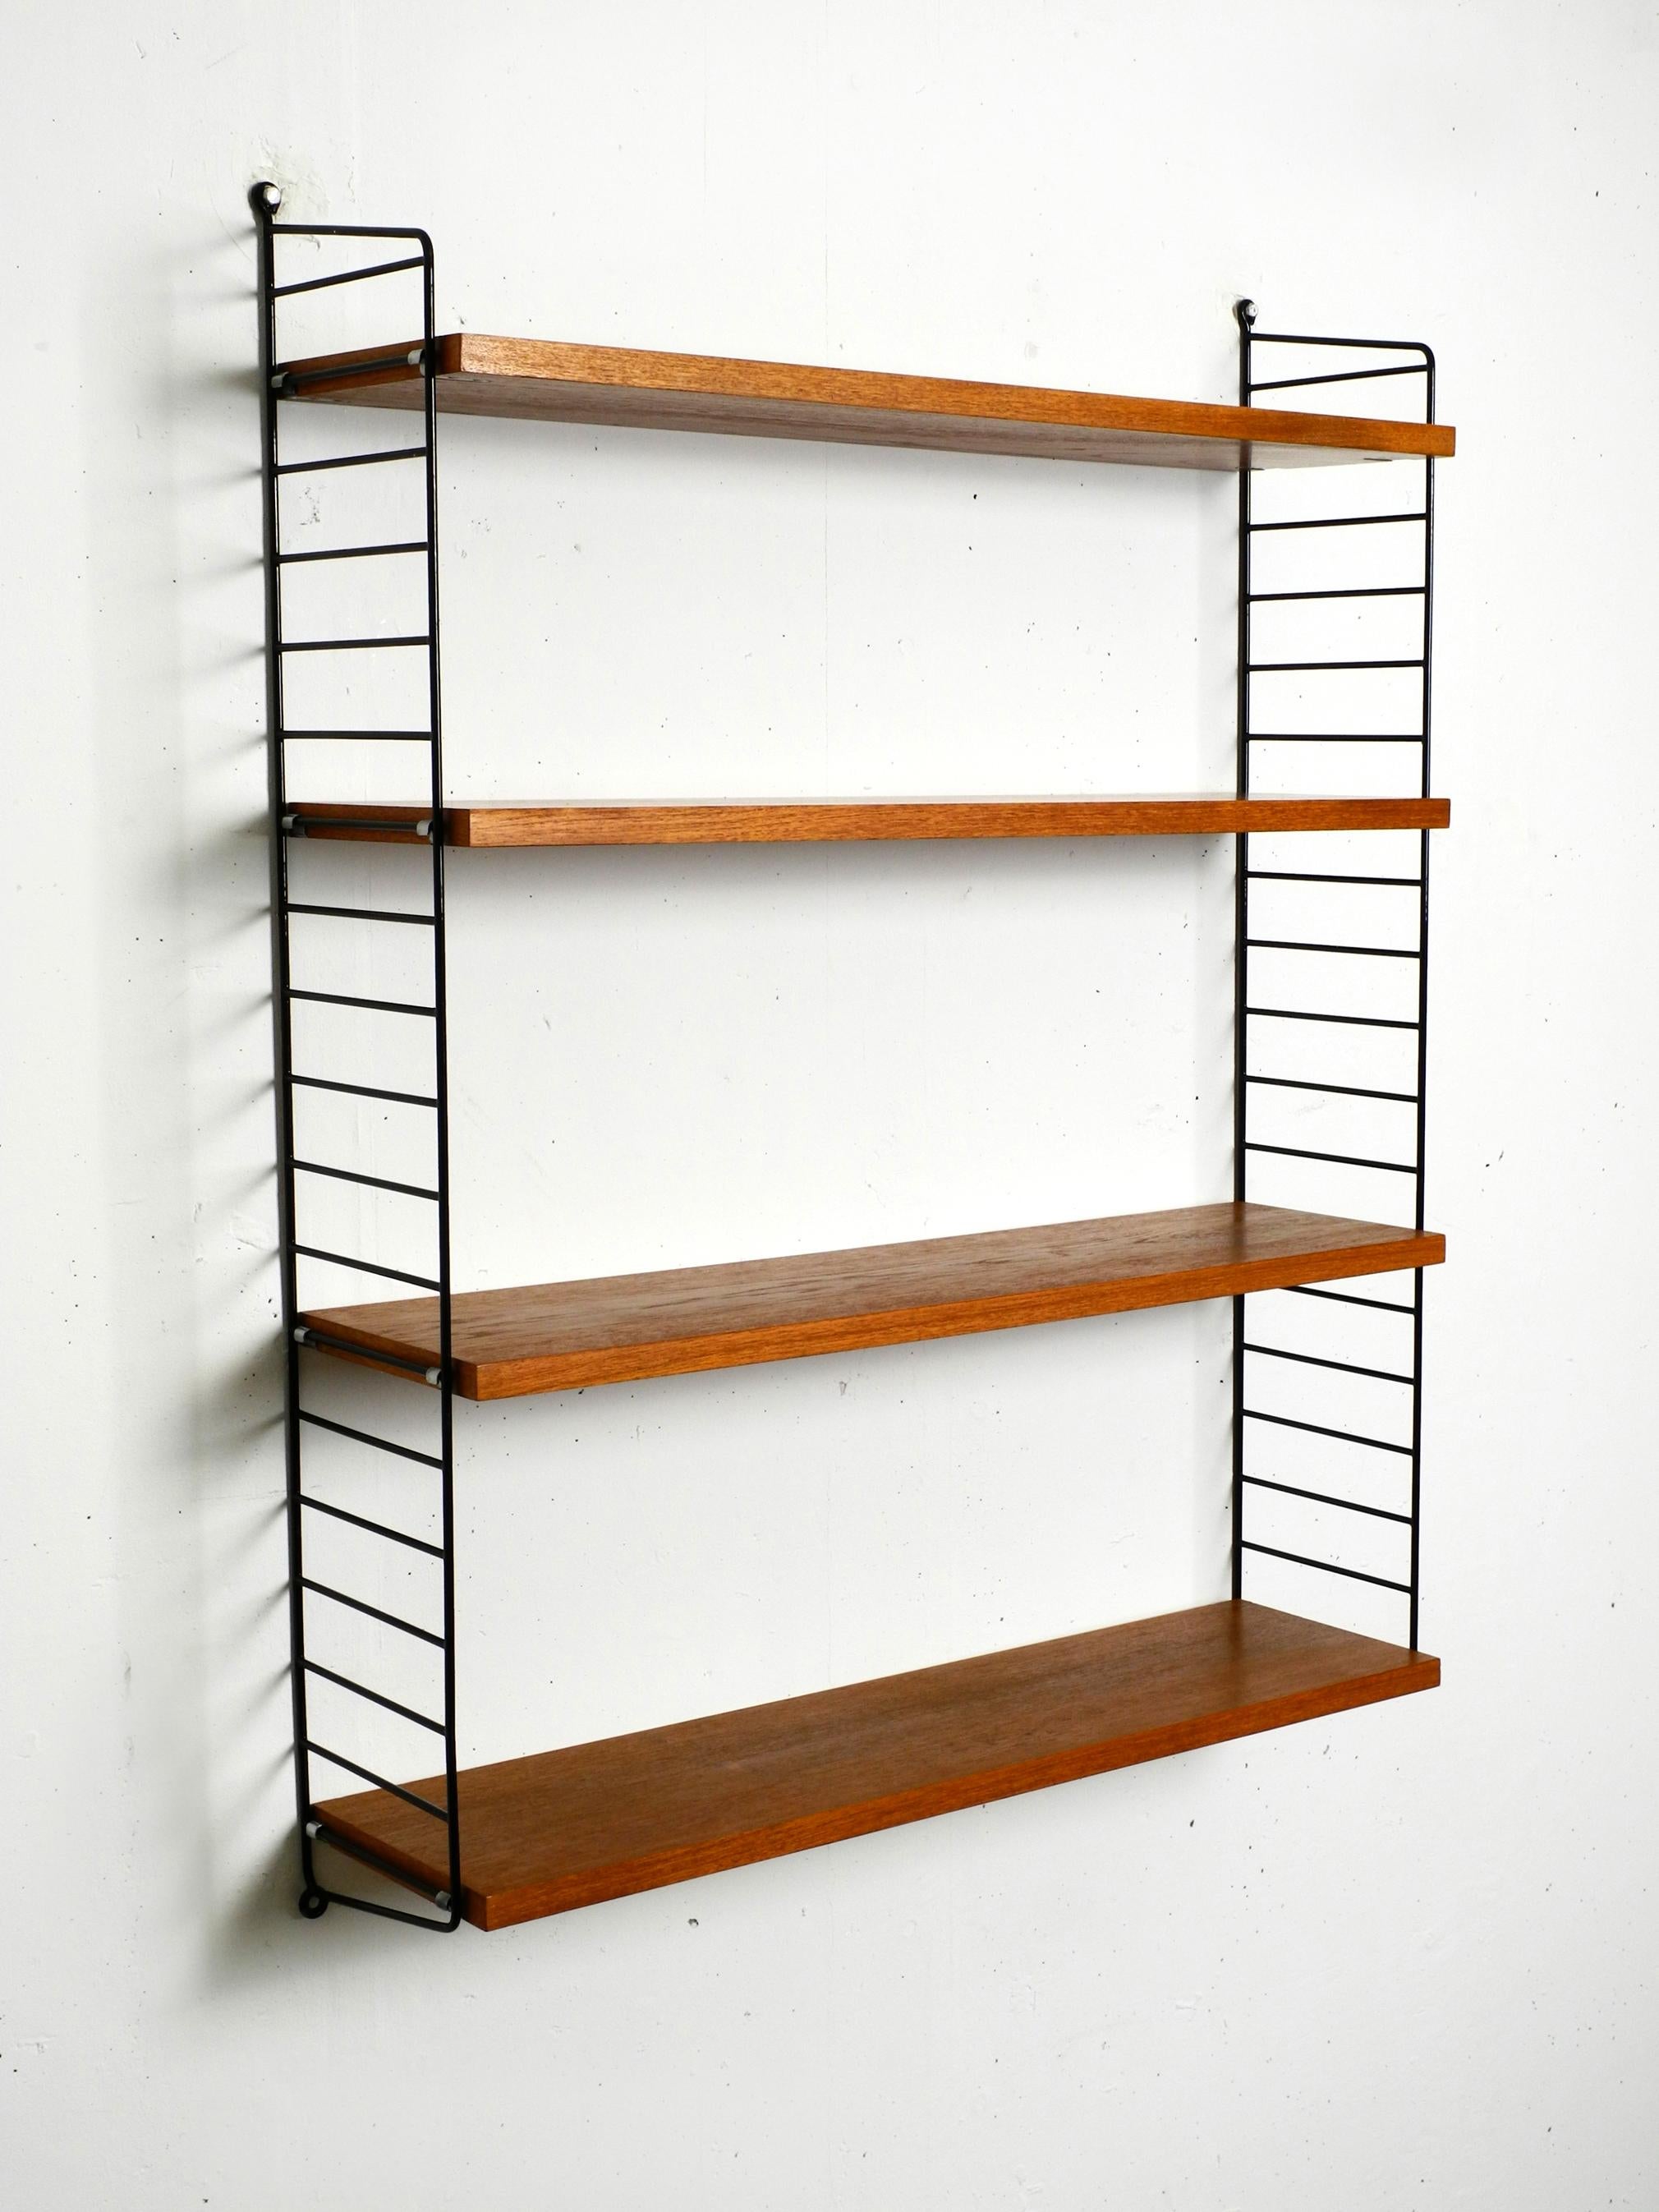 Original 1960s Nisse Strinning wall hanging shelf with four solid wood shelves with teak veneer. 2 metal ladders with black plastic coating. All four ladders are in good condition. No rust. The plastic coating is still perfect.
With slight signs of